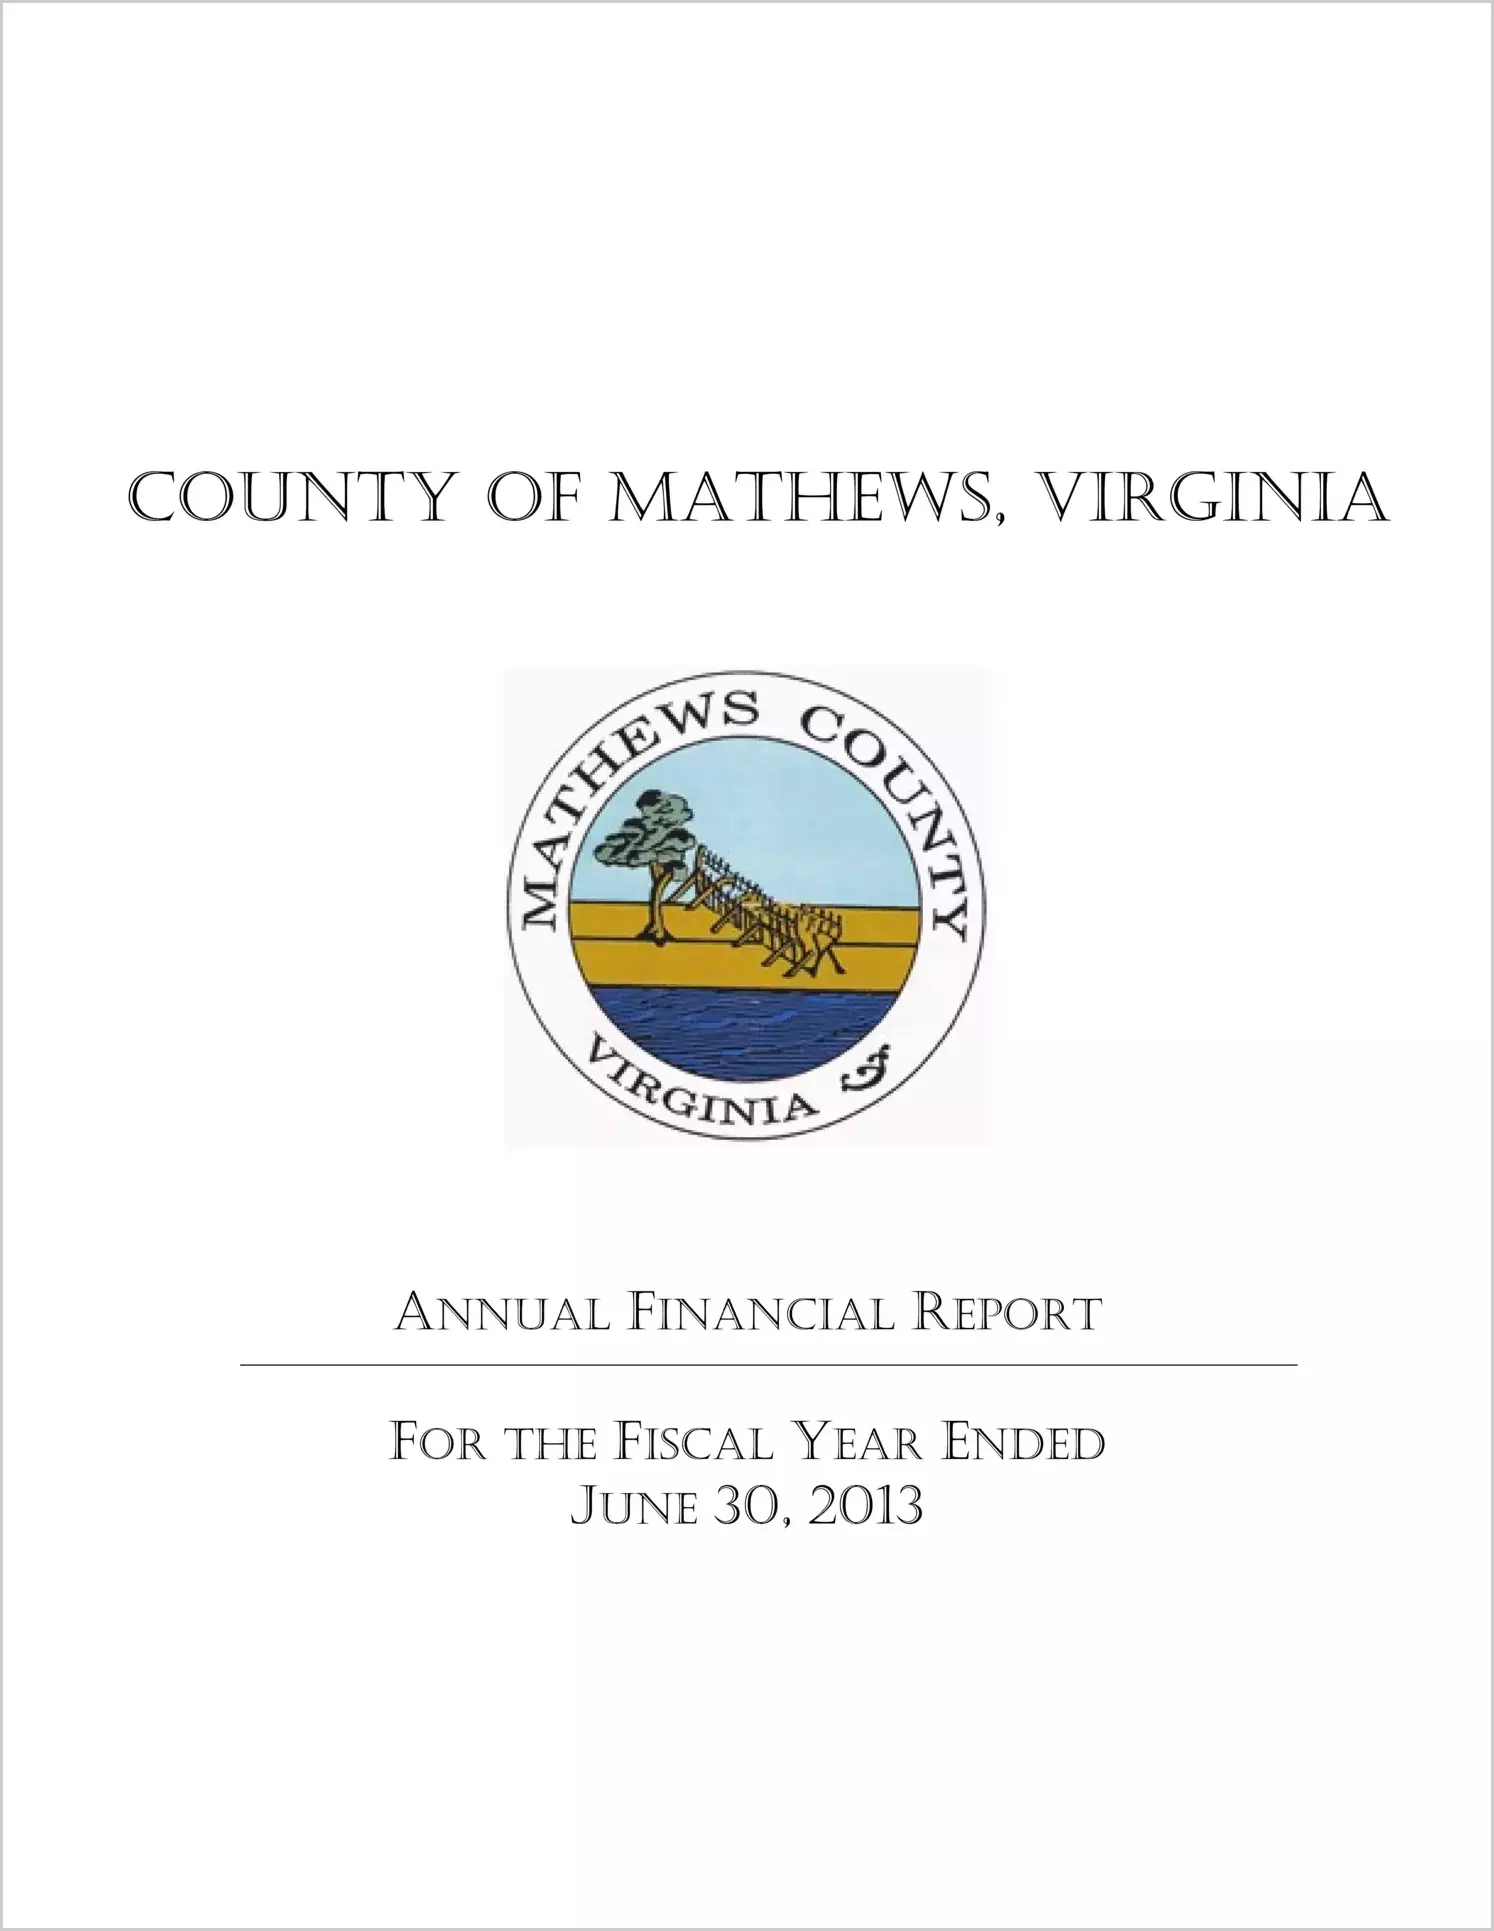 2013 Annual Financial Report for County of Mathews